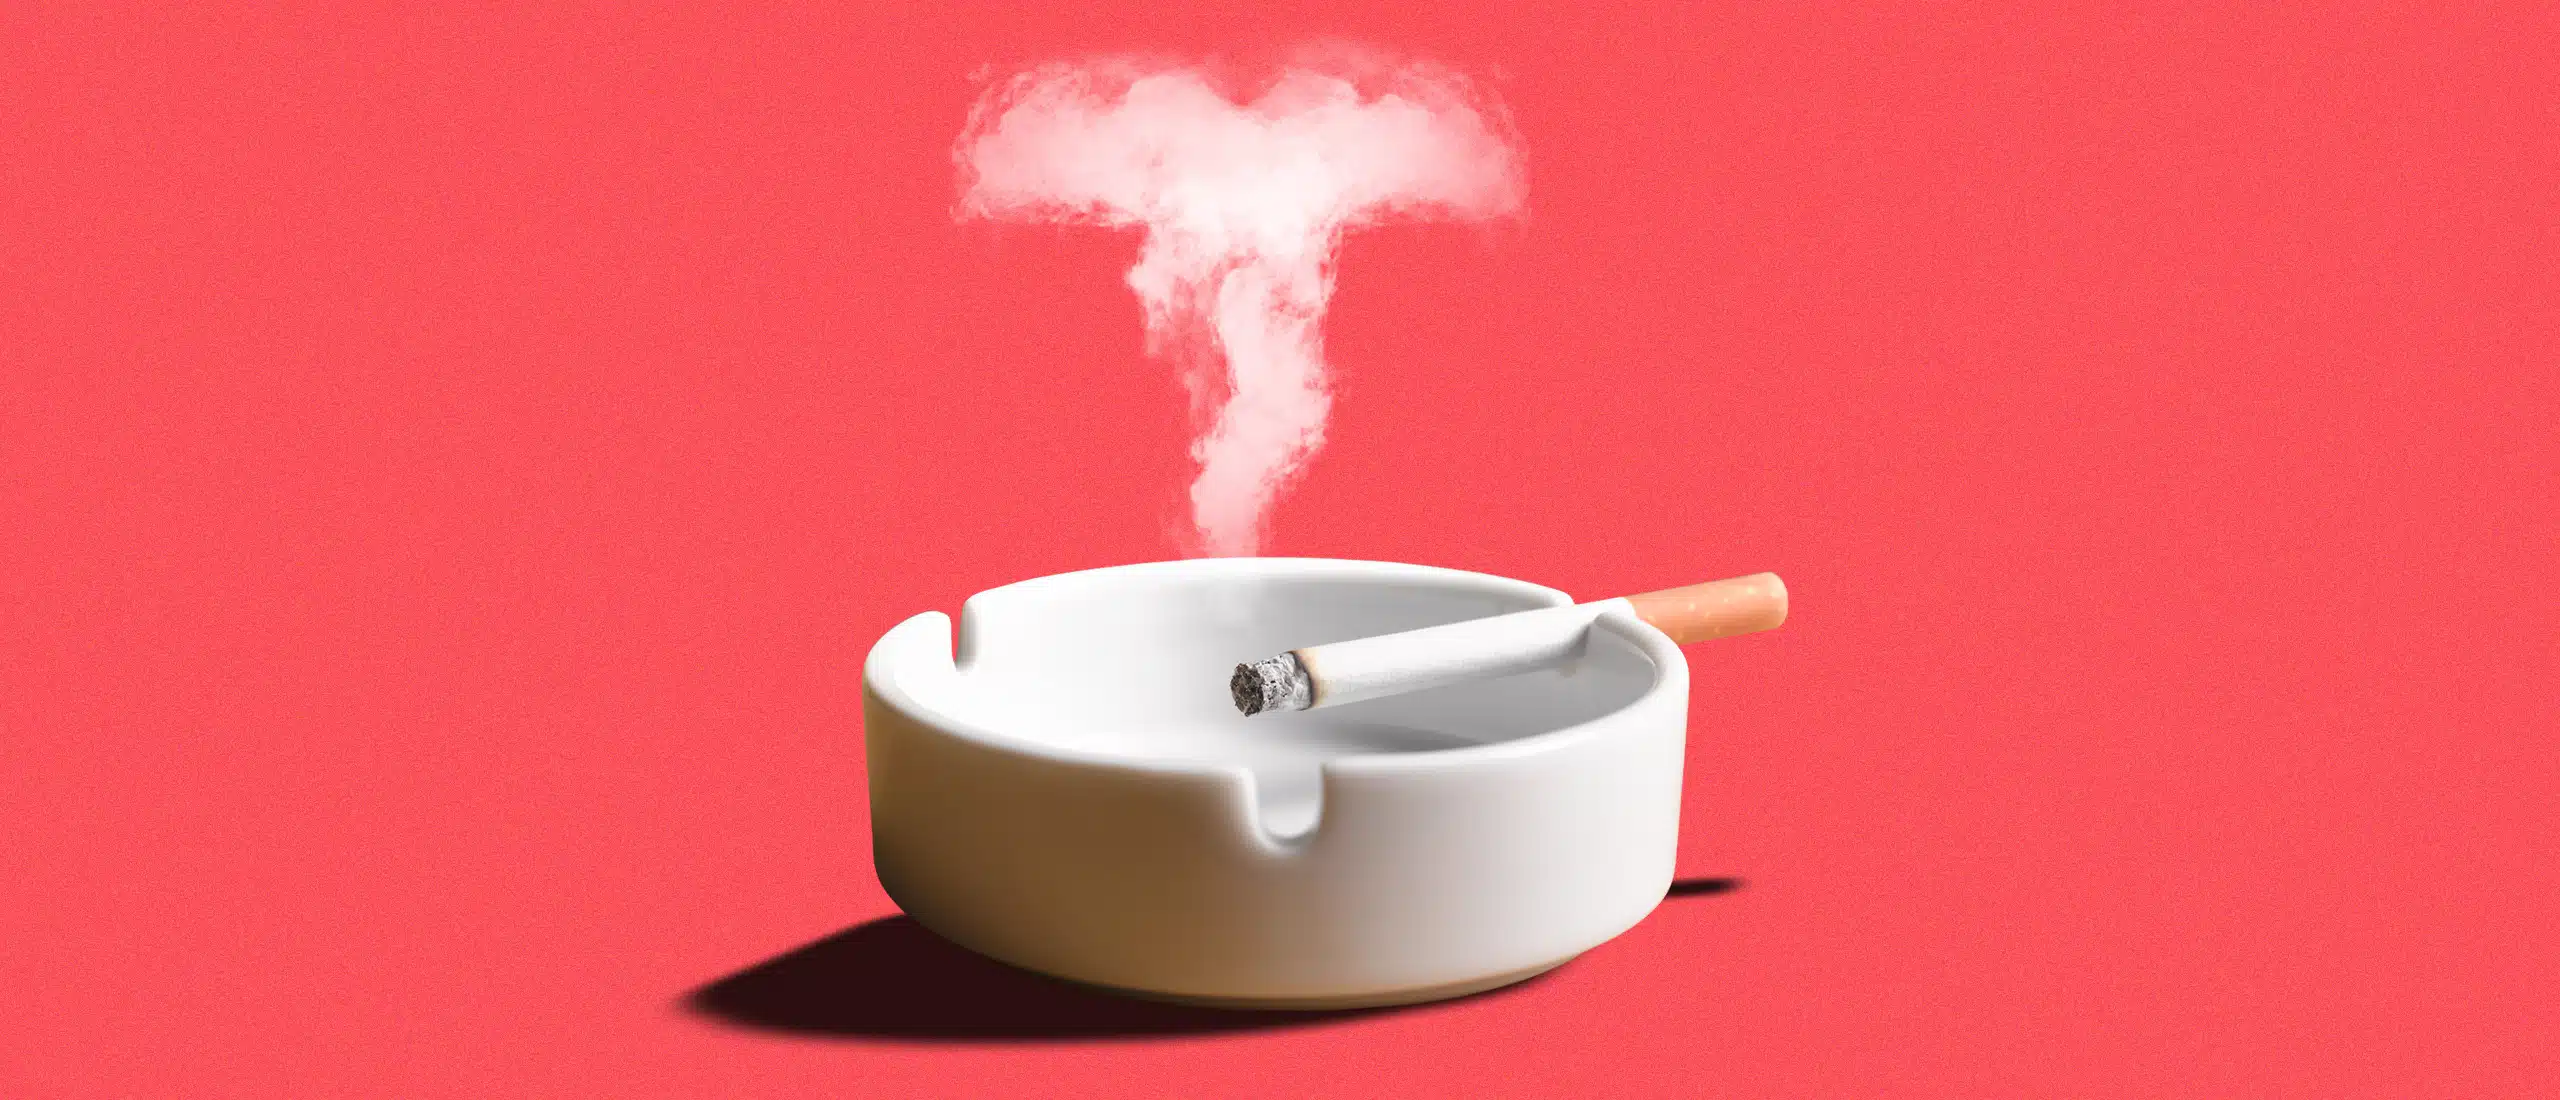 A cigarette in an ash tray. The smoke is in the shape of a T